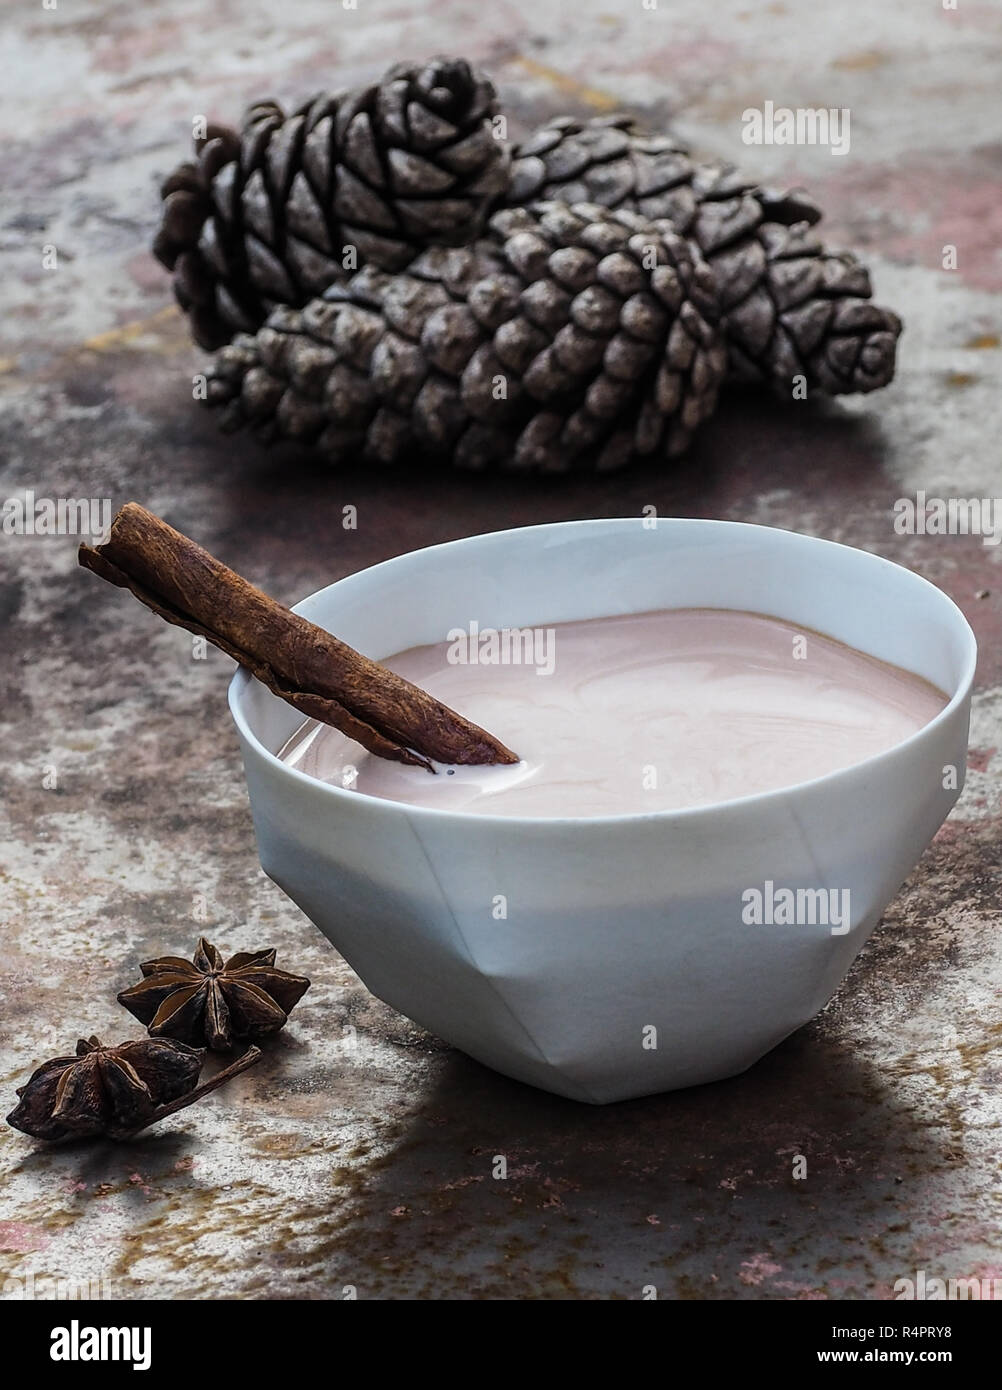 Homemade chai tea latte in a white porcelain bowl with cinnamon stick. Stock Photo